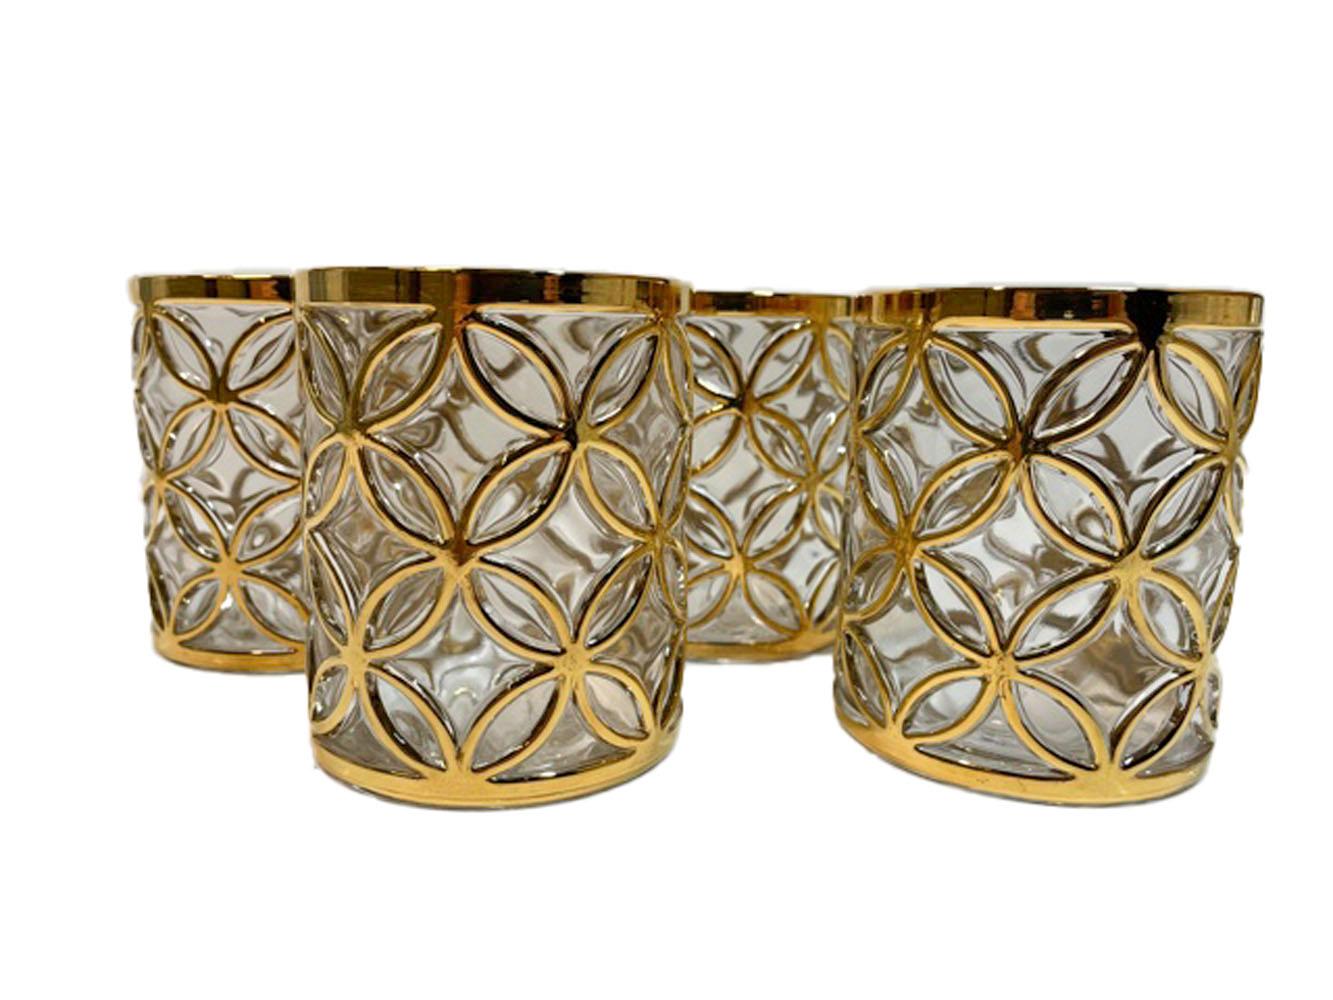 Mid-Century Modern rocks glasses made by Imperial Glass Company in the Sortijas de Oro pattern with a pattern of raised interlocked rings plated in 22 karat gold.